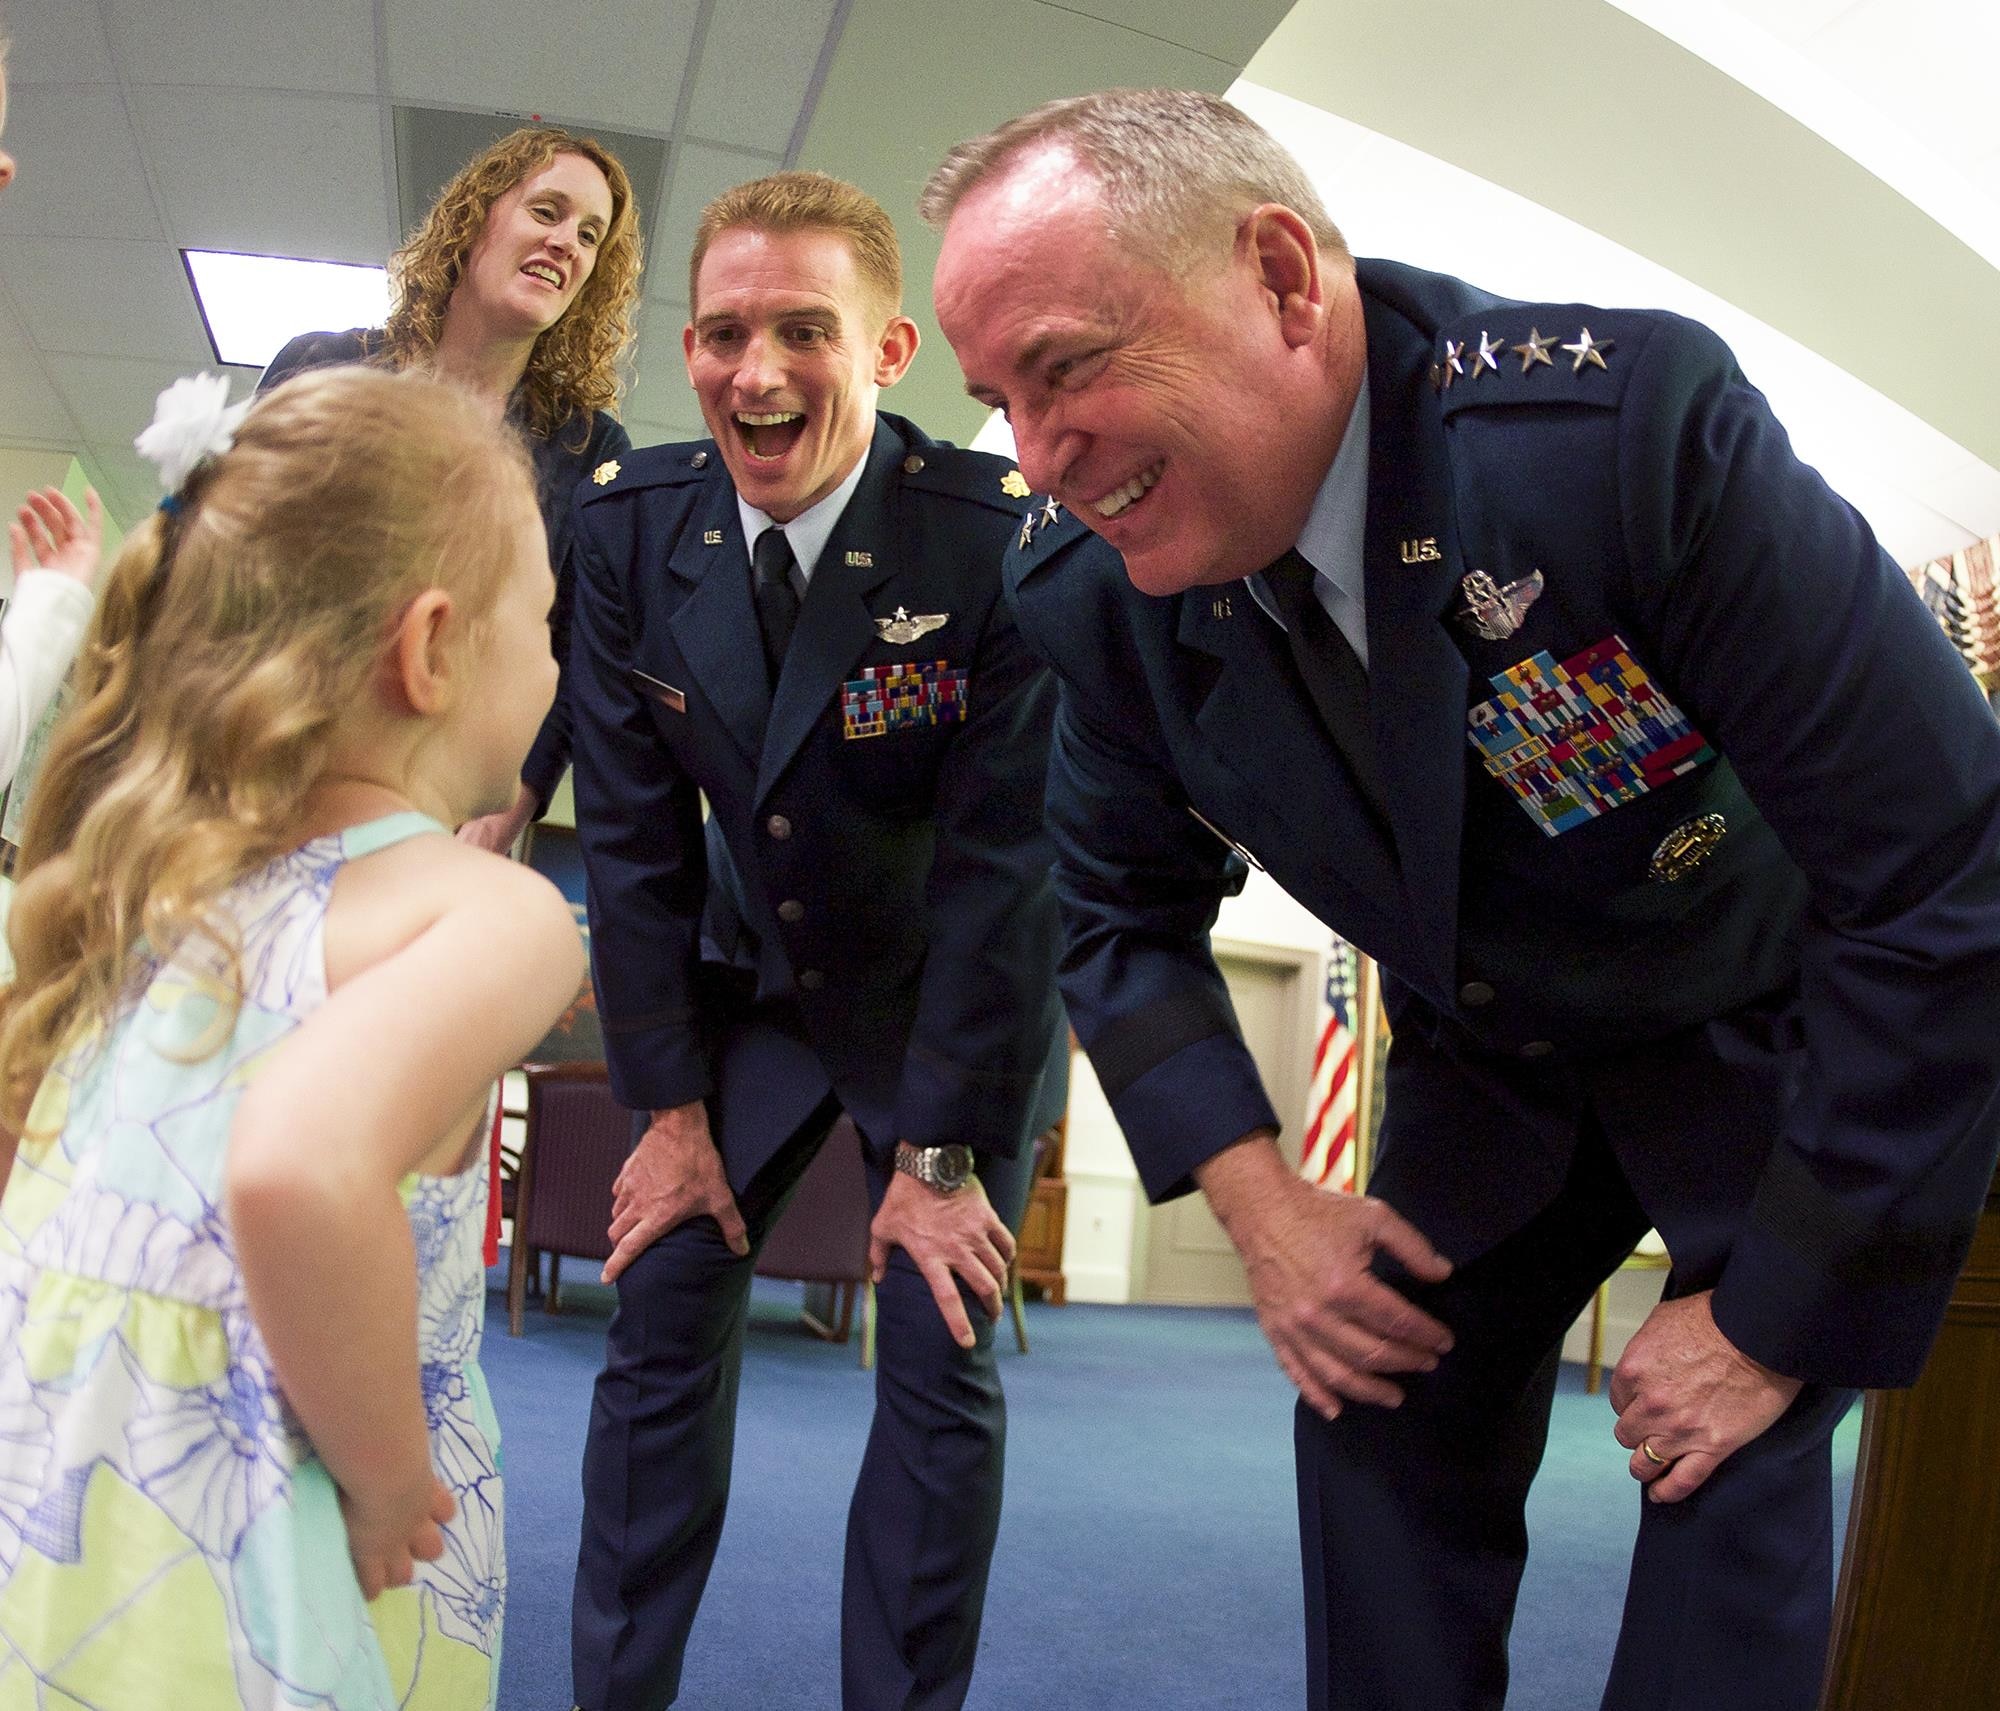 Air Force Chief of Staff Gen. Mark A. Welsh III hosts Maj. Jack Nelson and his family prior to Nelson receiving the 2015 Koren Kolligian Jr. Trophy at the Pentagon in Washington, D.C., May 25, 2016. Nelson, from the 9th Reconnaissance Wing at Osan Air Base, South Korea, received the award for his exceptional piloting skills and ingenuity at a moment of crisis during a mission. (U.S. Air Force photo/Andy Morataya)